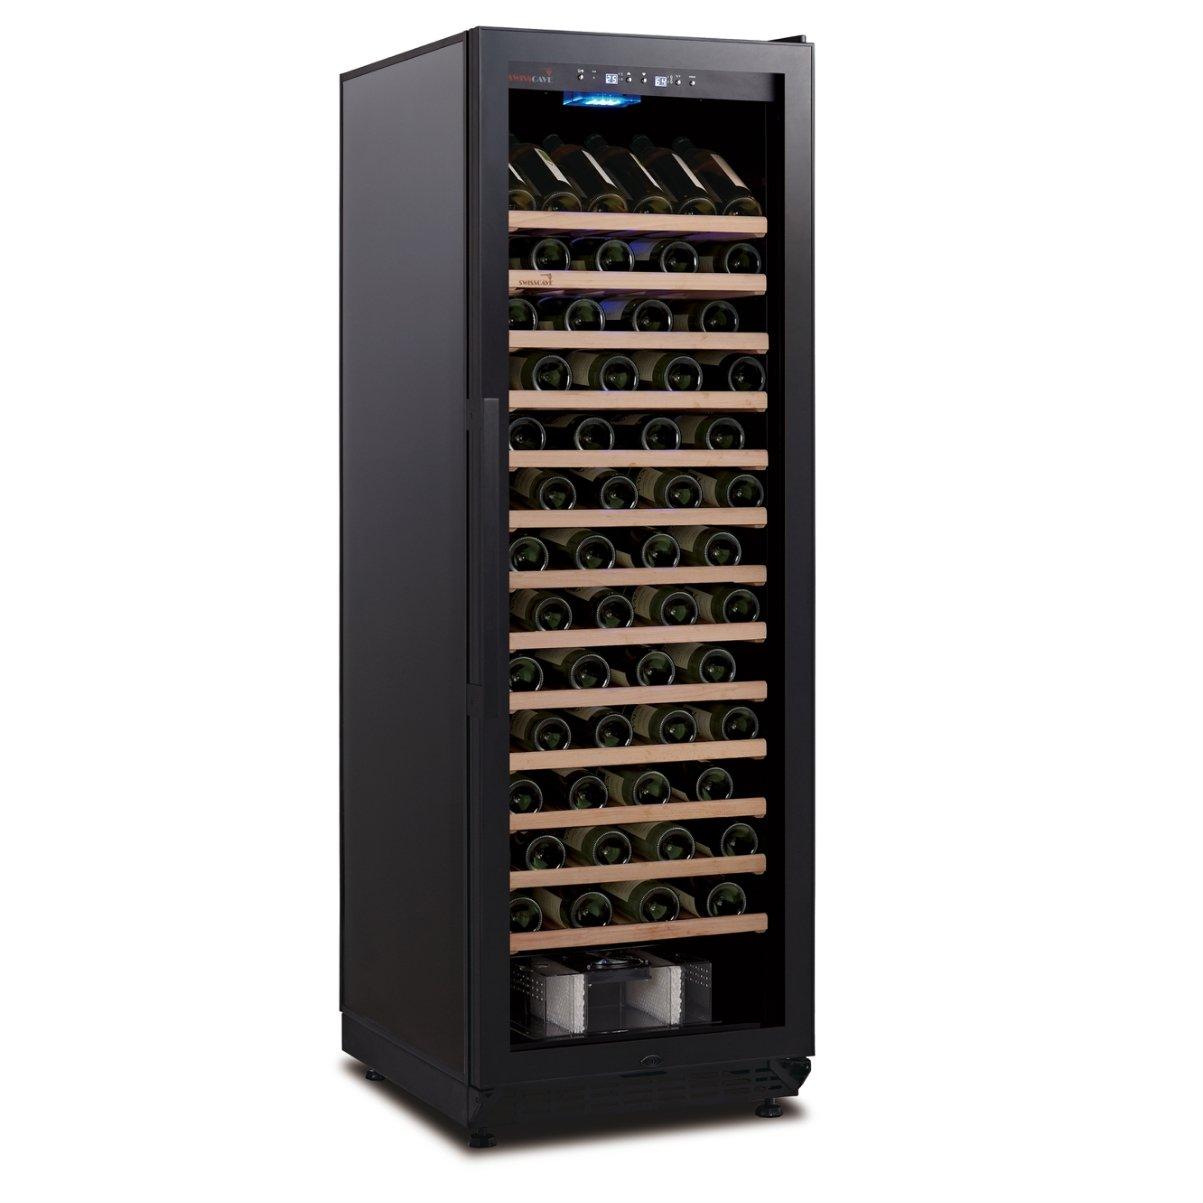 Swisscave WLB-450FHU - Black Edition - Single Zone Wine Cooler / Wine Fridge (170-200 BOT) with Active Air Humidification Management - 600mm Wide - winestorageuk